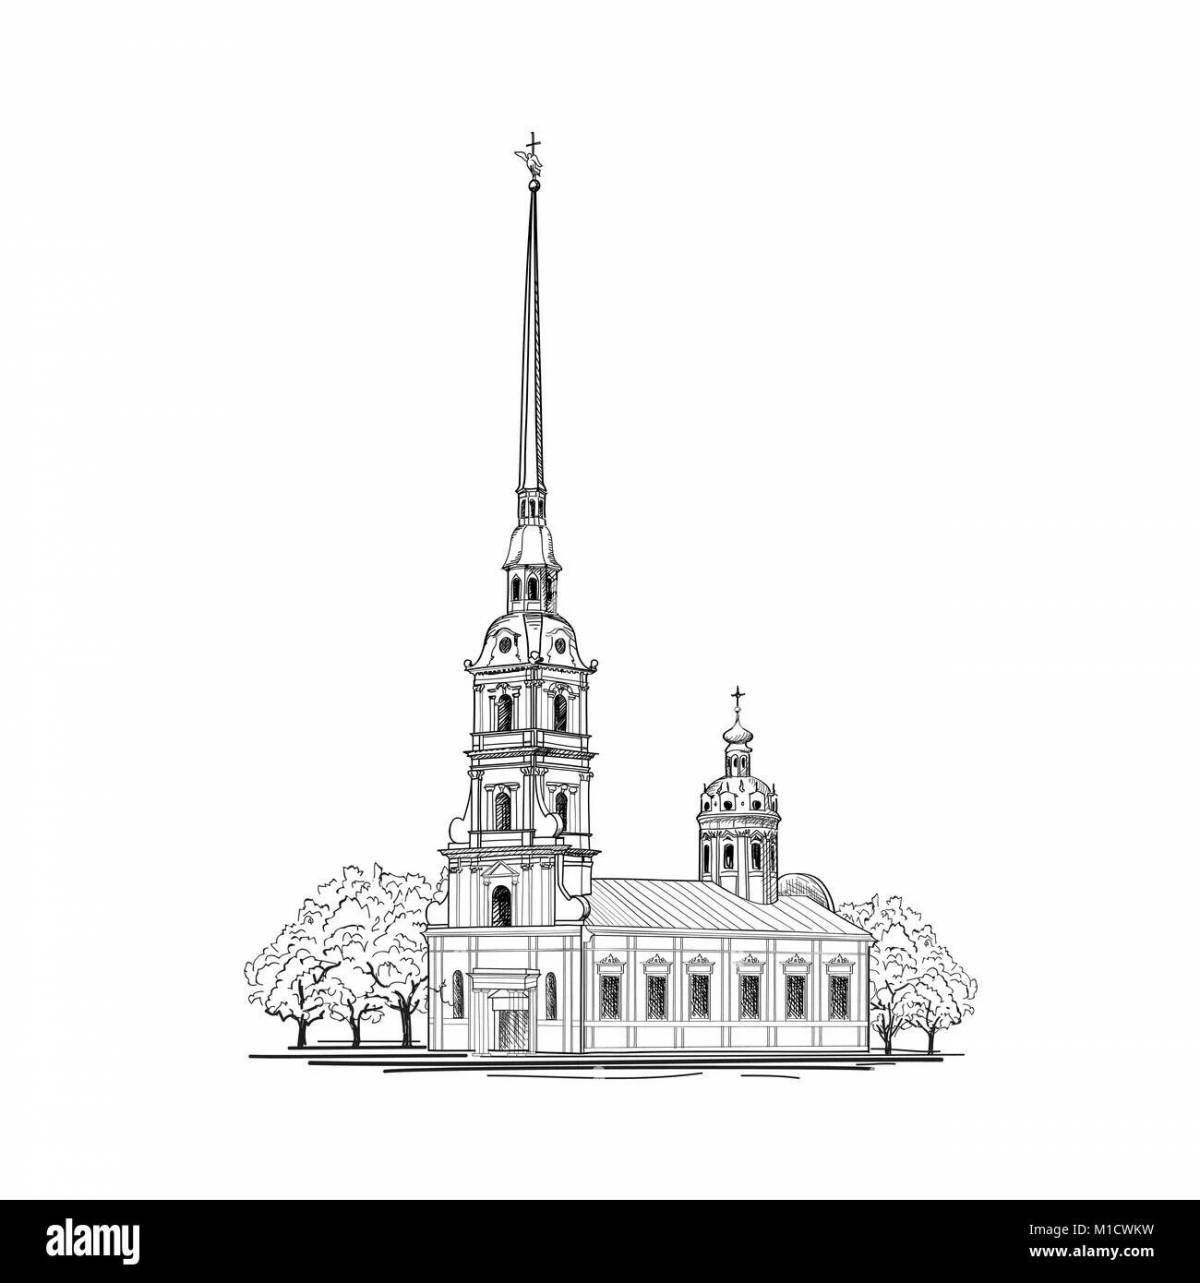 Merry Peter and Paul Fortress coloring book for children